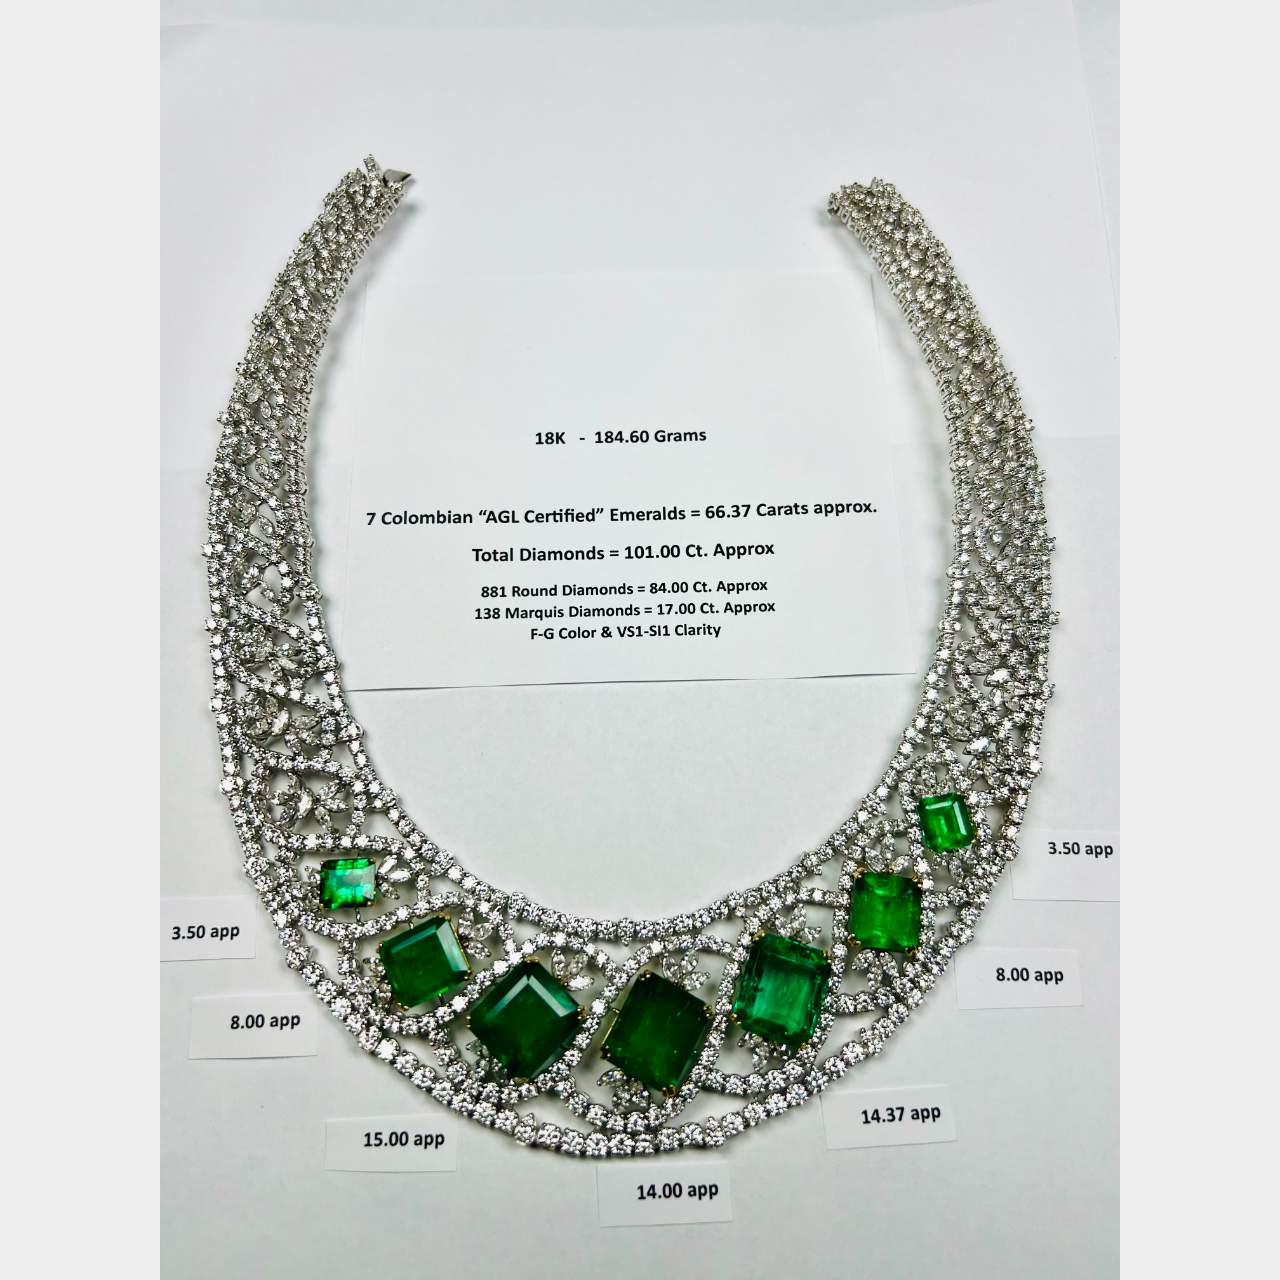 Emerald Necklace Goes for $7M at Christie's